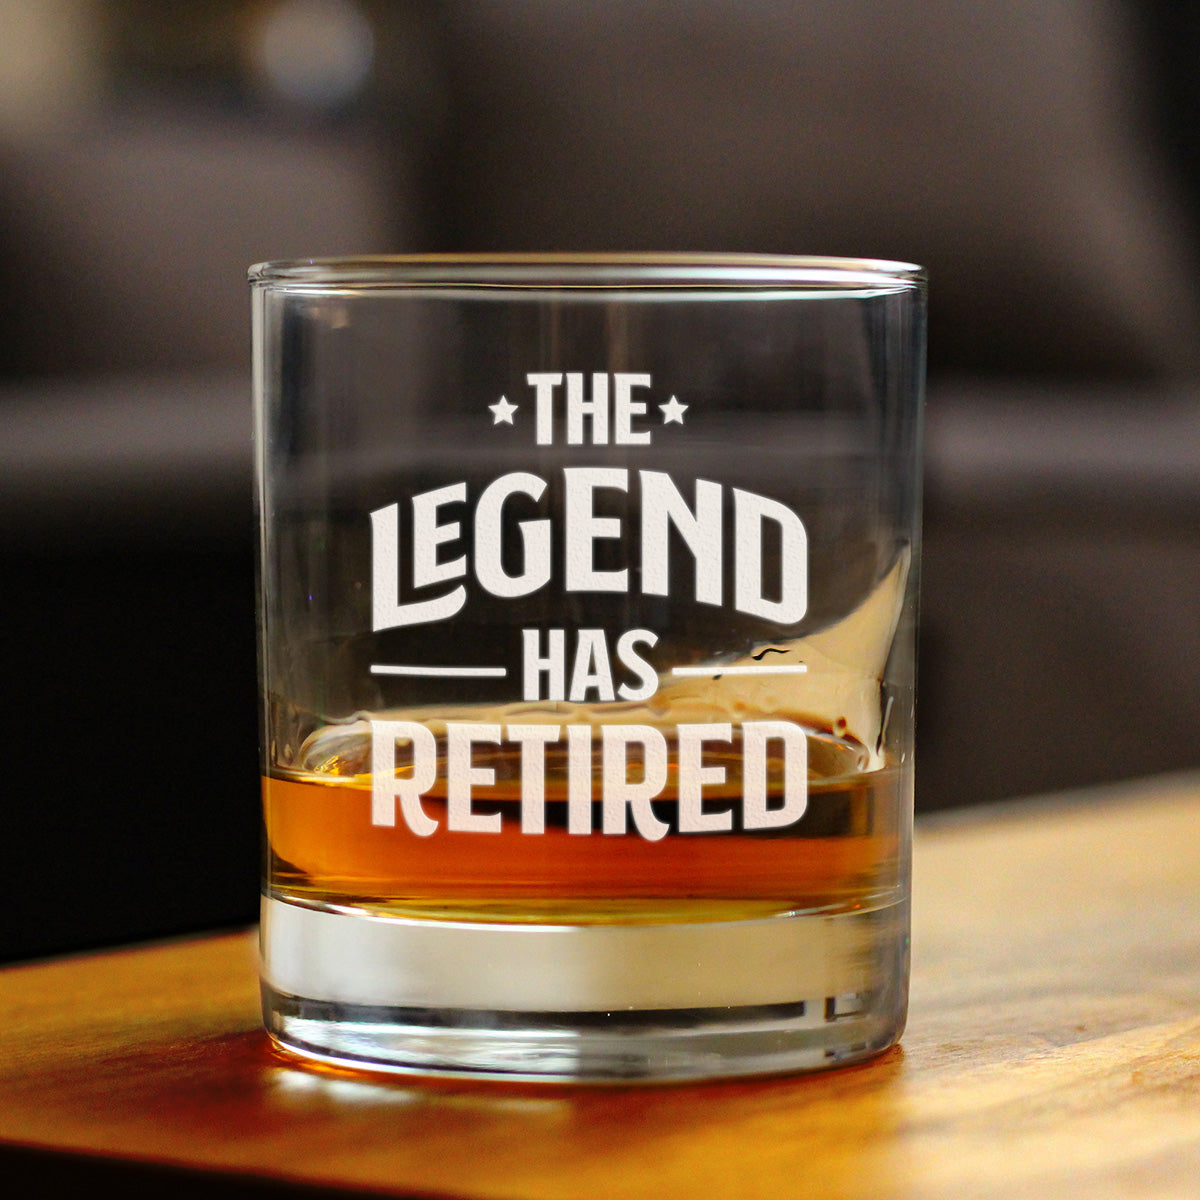 The Legend Has Retired - Whiskey Rocks Glass - Funny Retirement Gifts for Boss or Coworkers - 10.25 Oz